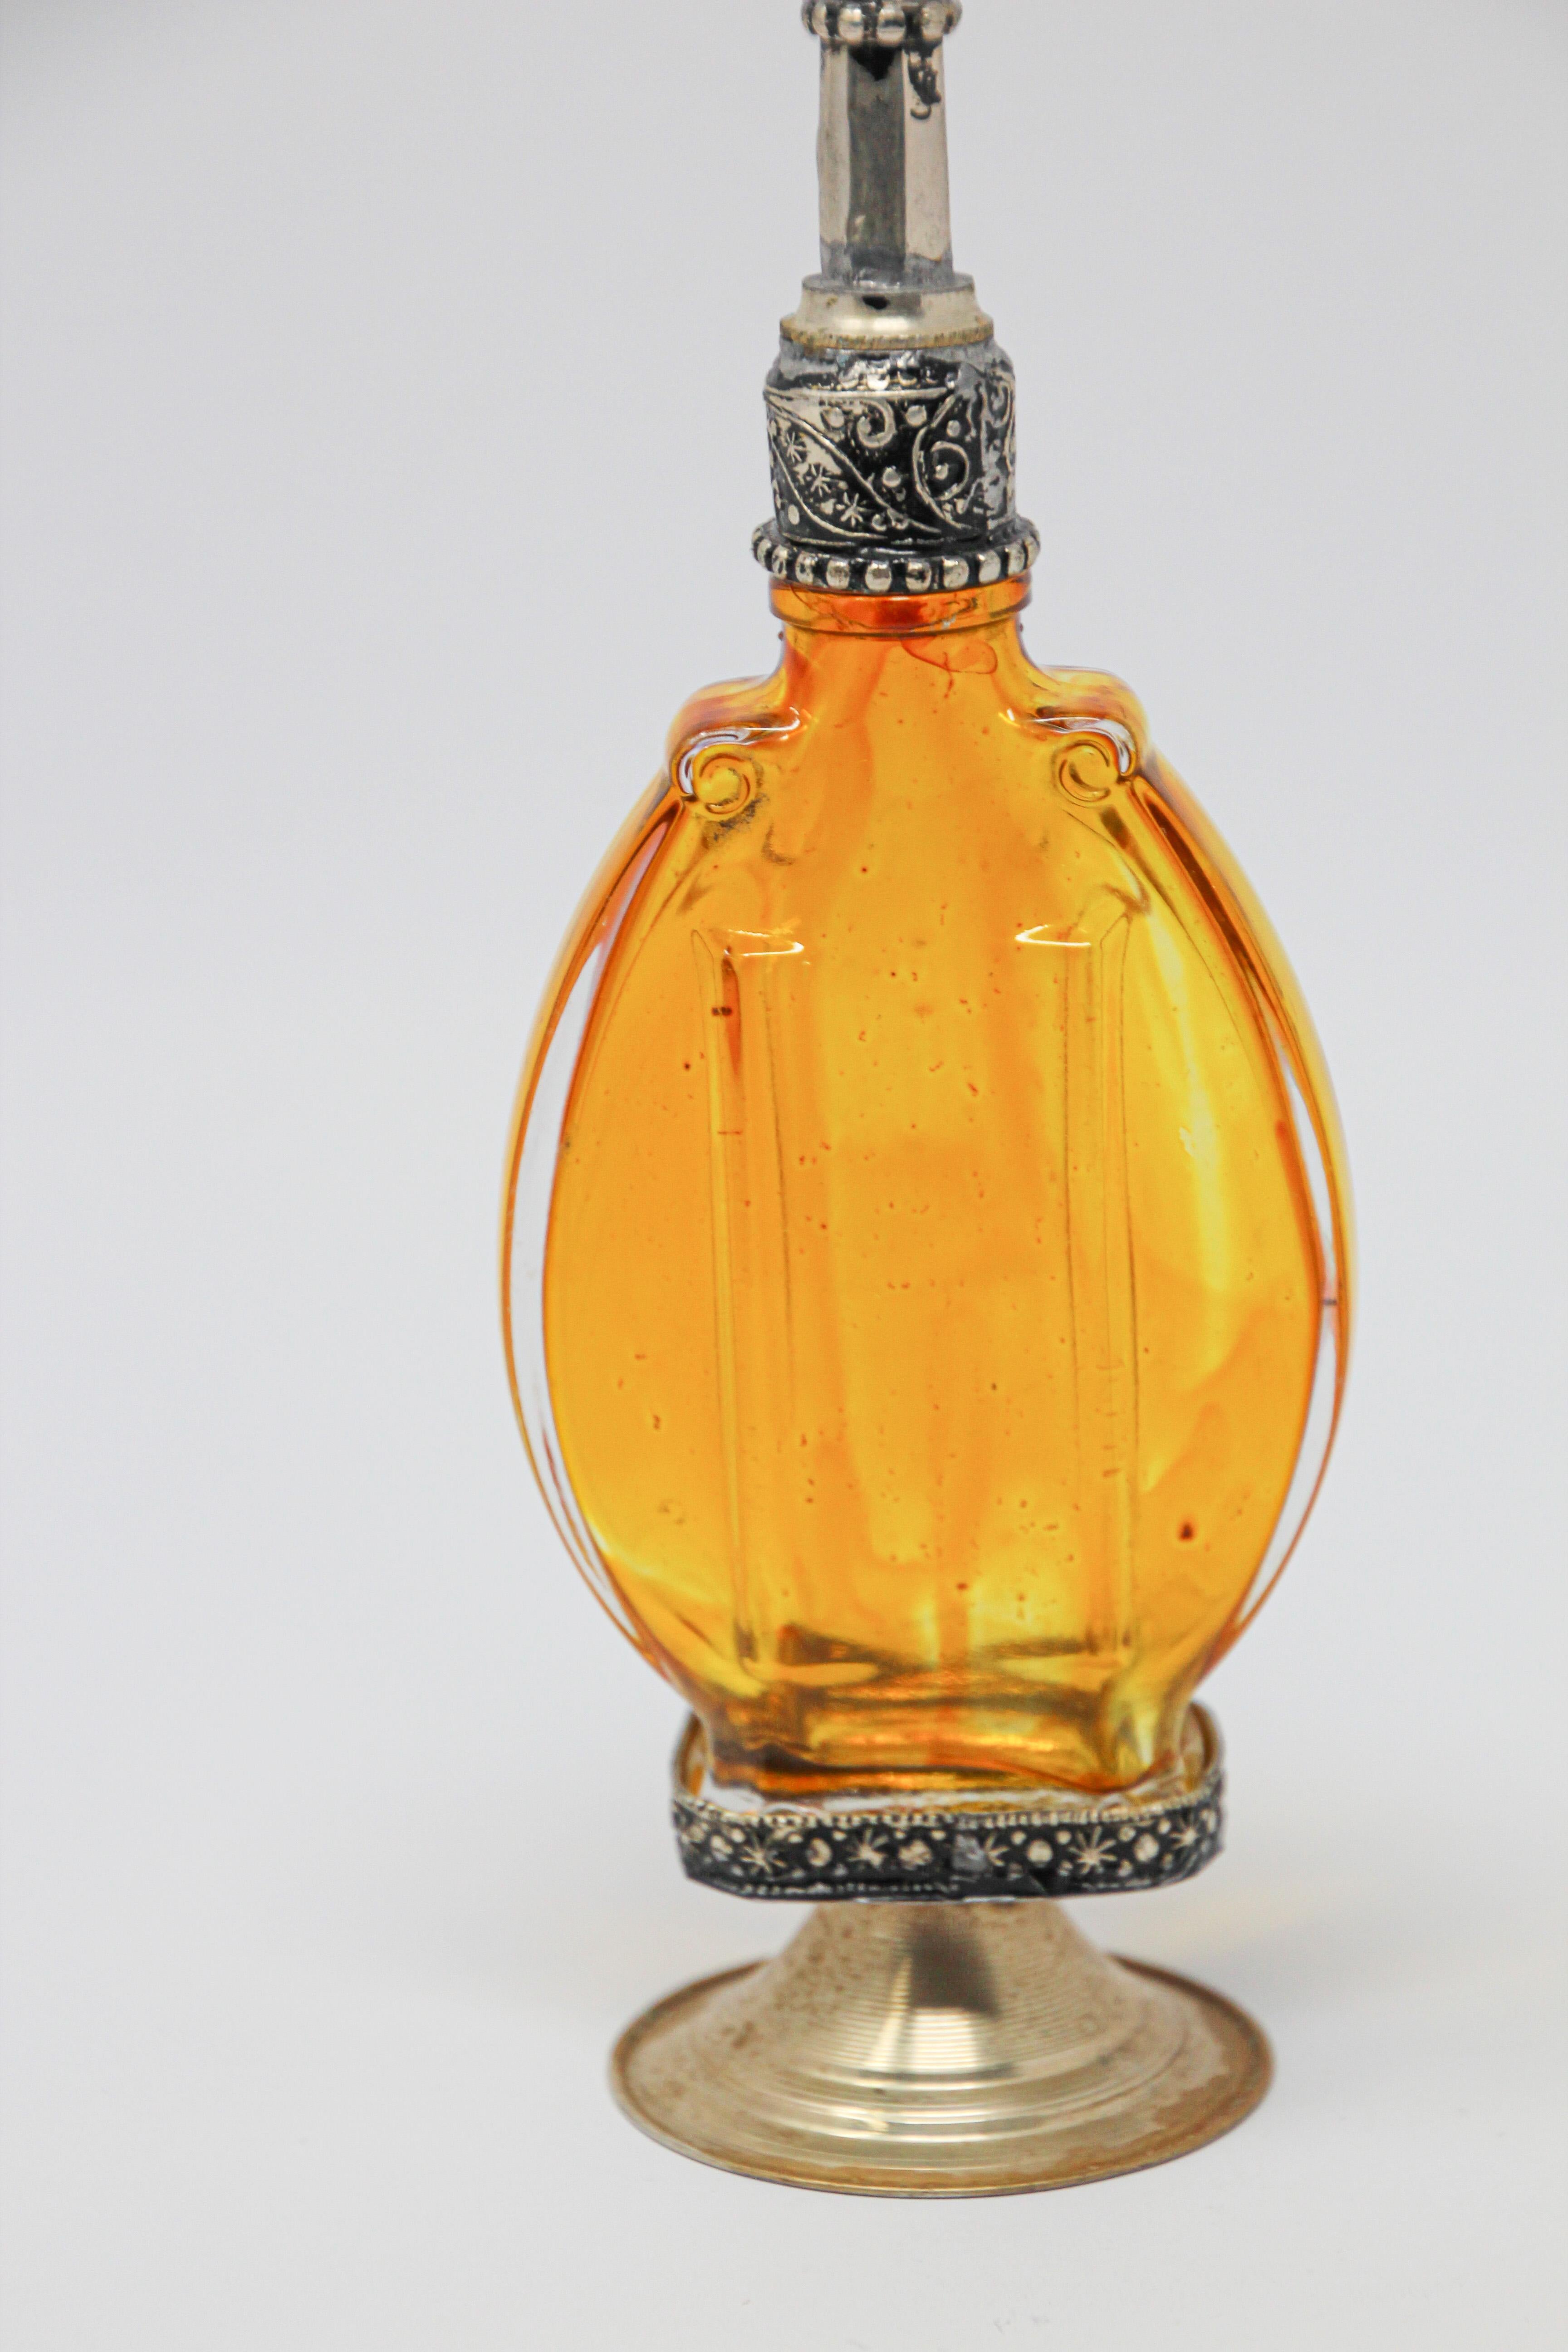 Handcrafted Moroccan Moorish amber painted glass perfume bottle or rose water sprinkler with raised embossed silvered metal floral design over amber glass.
The pressed glass bottle in Art Deco, Art Nouveau style is oval shape with curved sides and